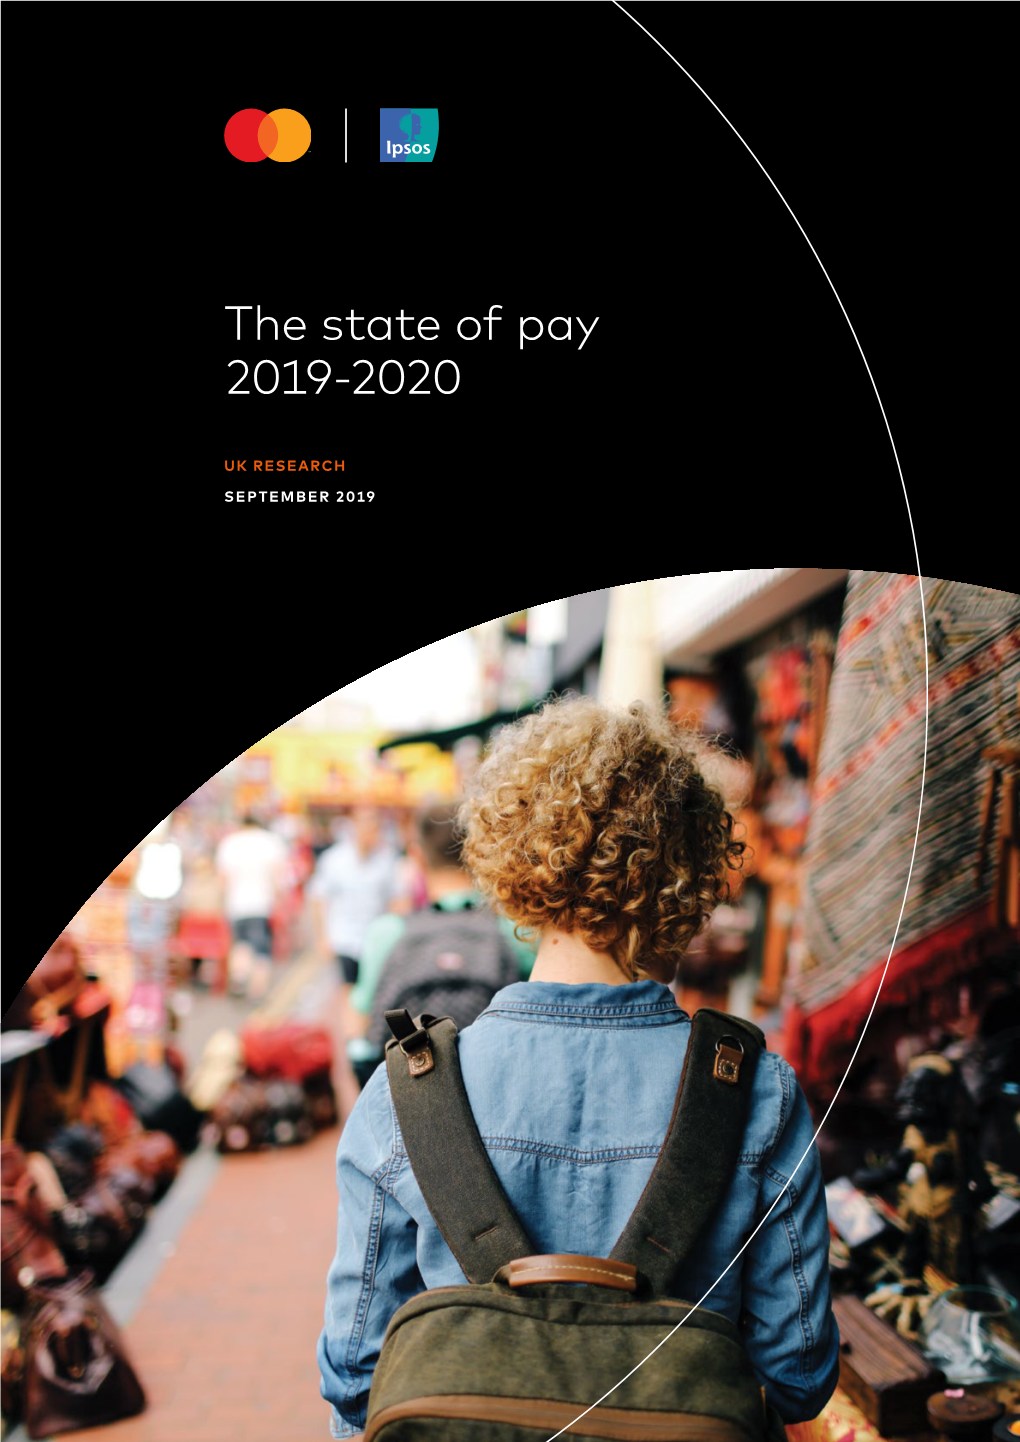 The State of Pay 2019-2020